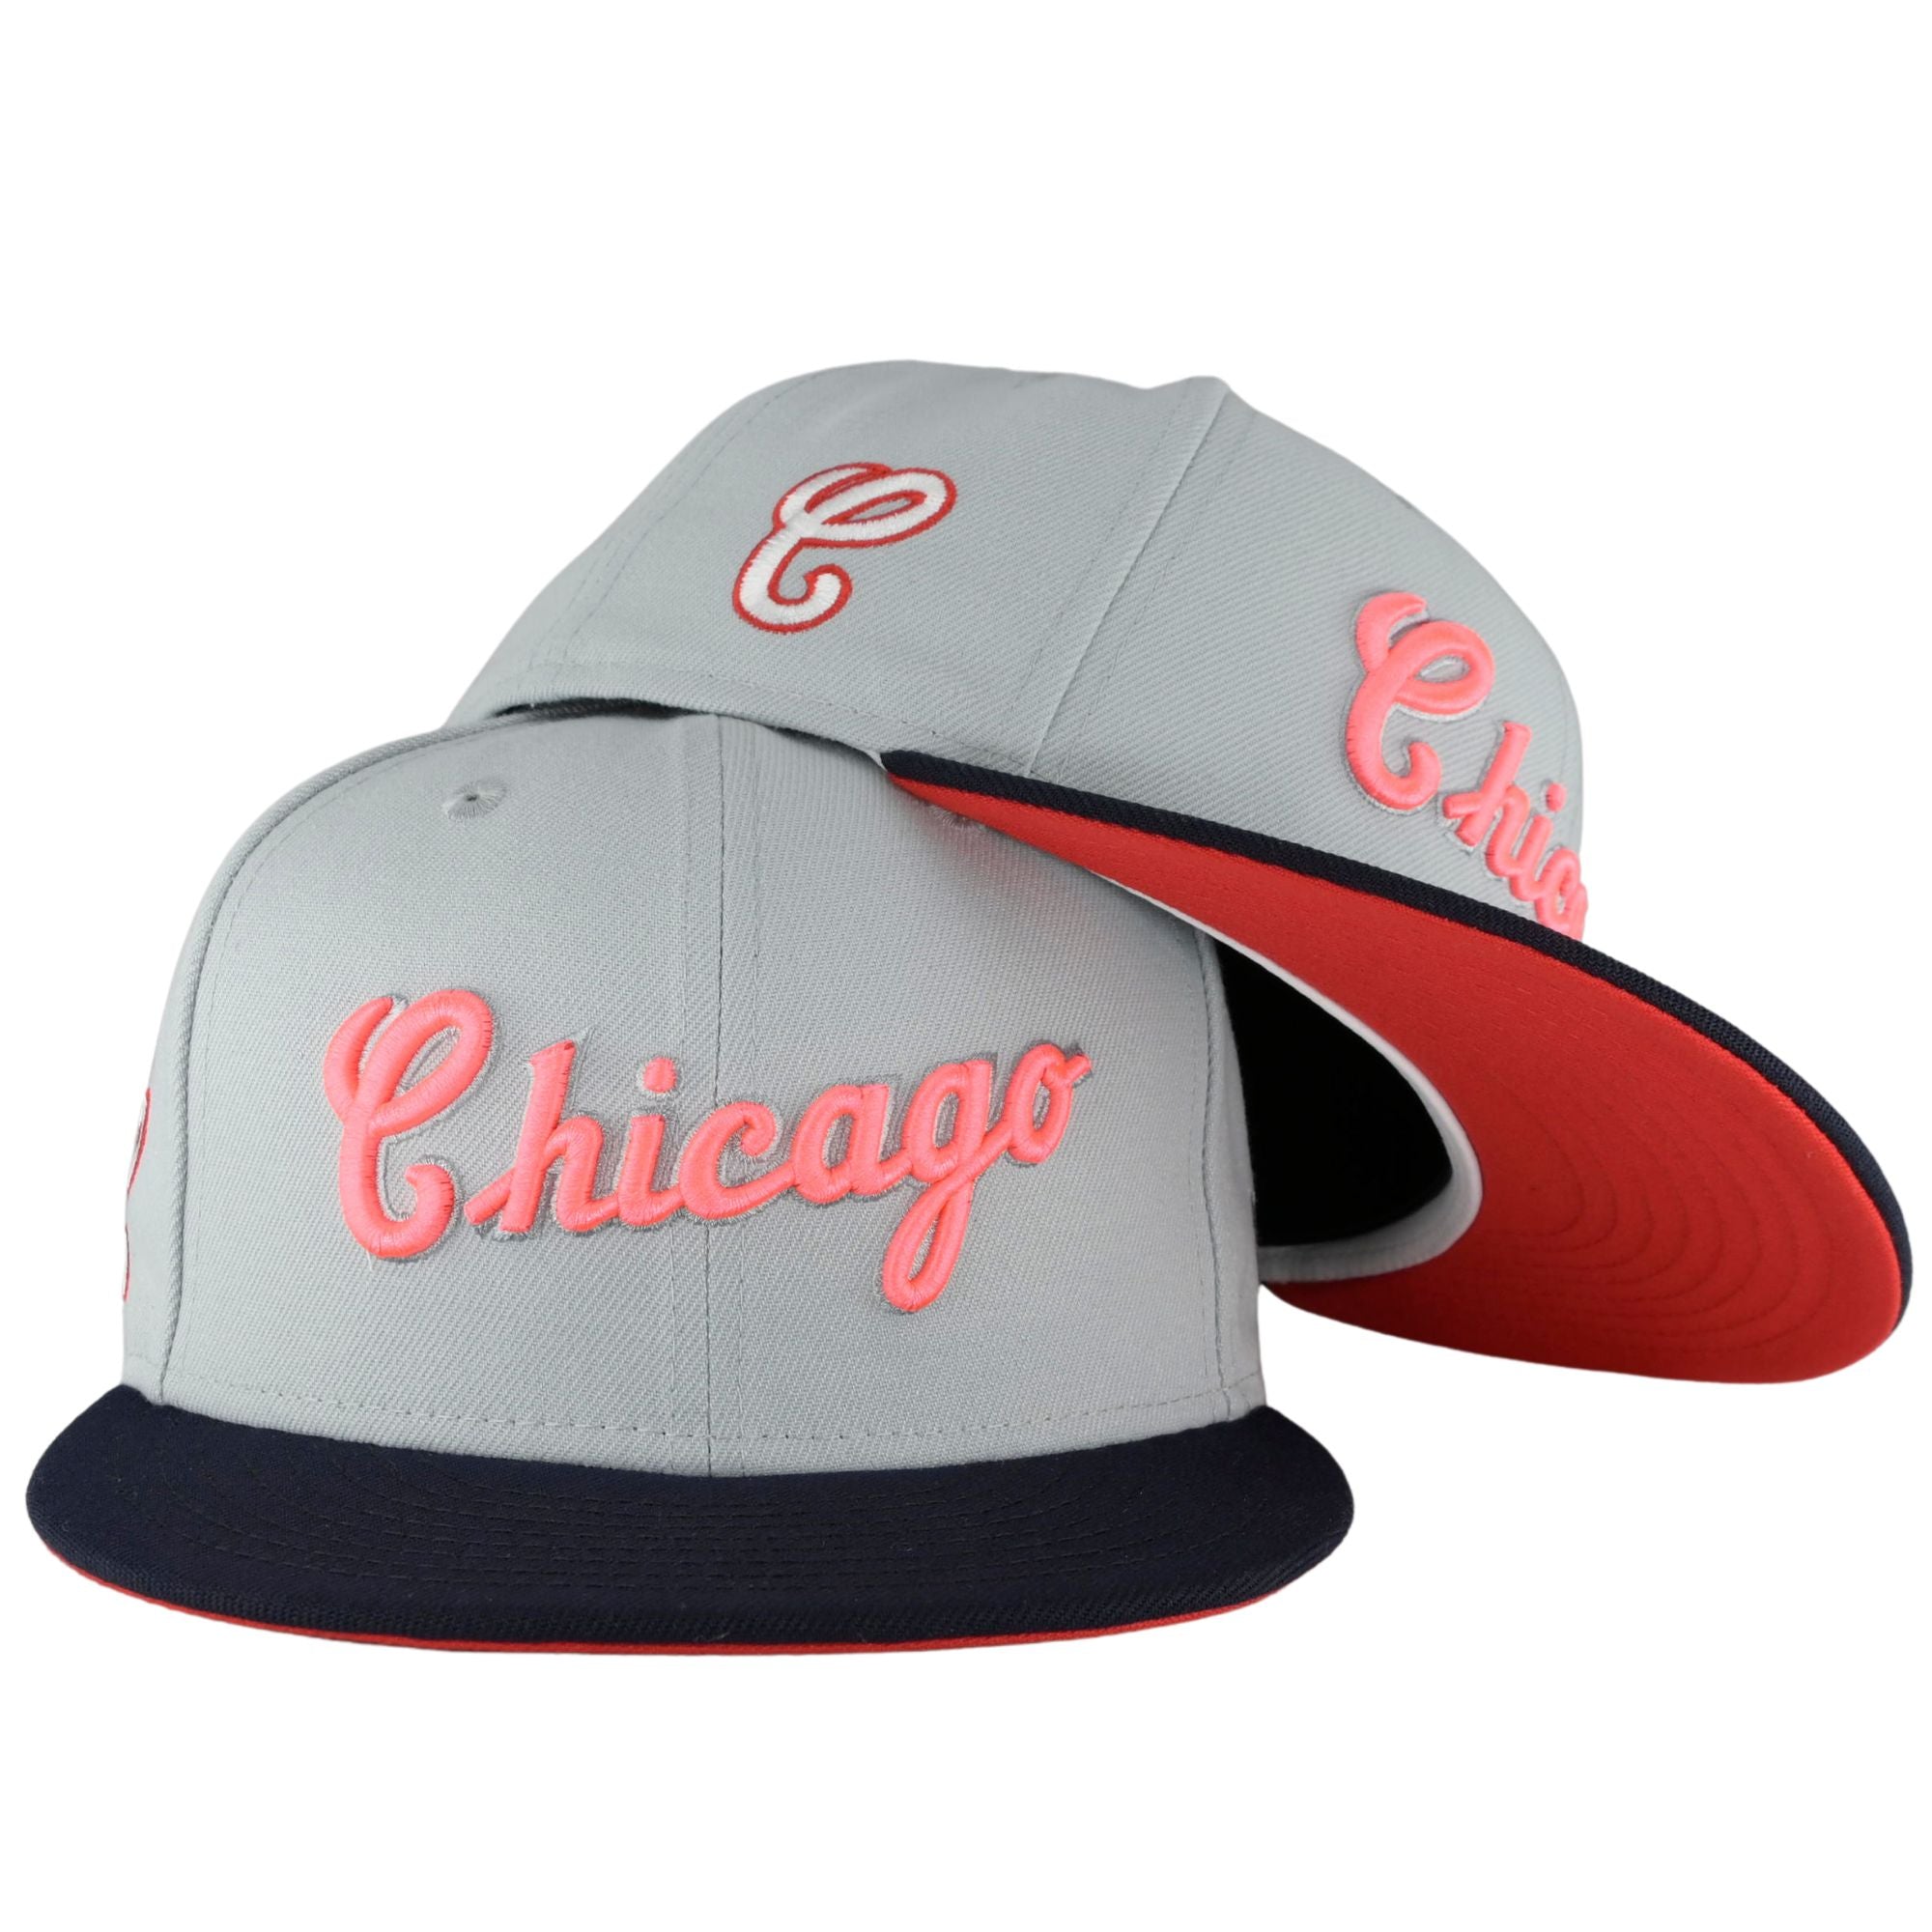 Chicago White Sox New Era Retro 59FIFTY Fitted Hat - Stone/Navy